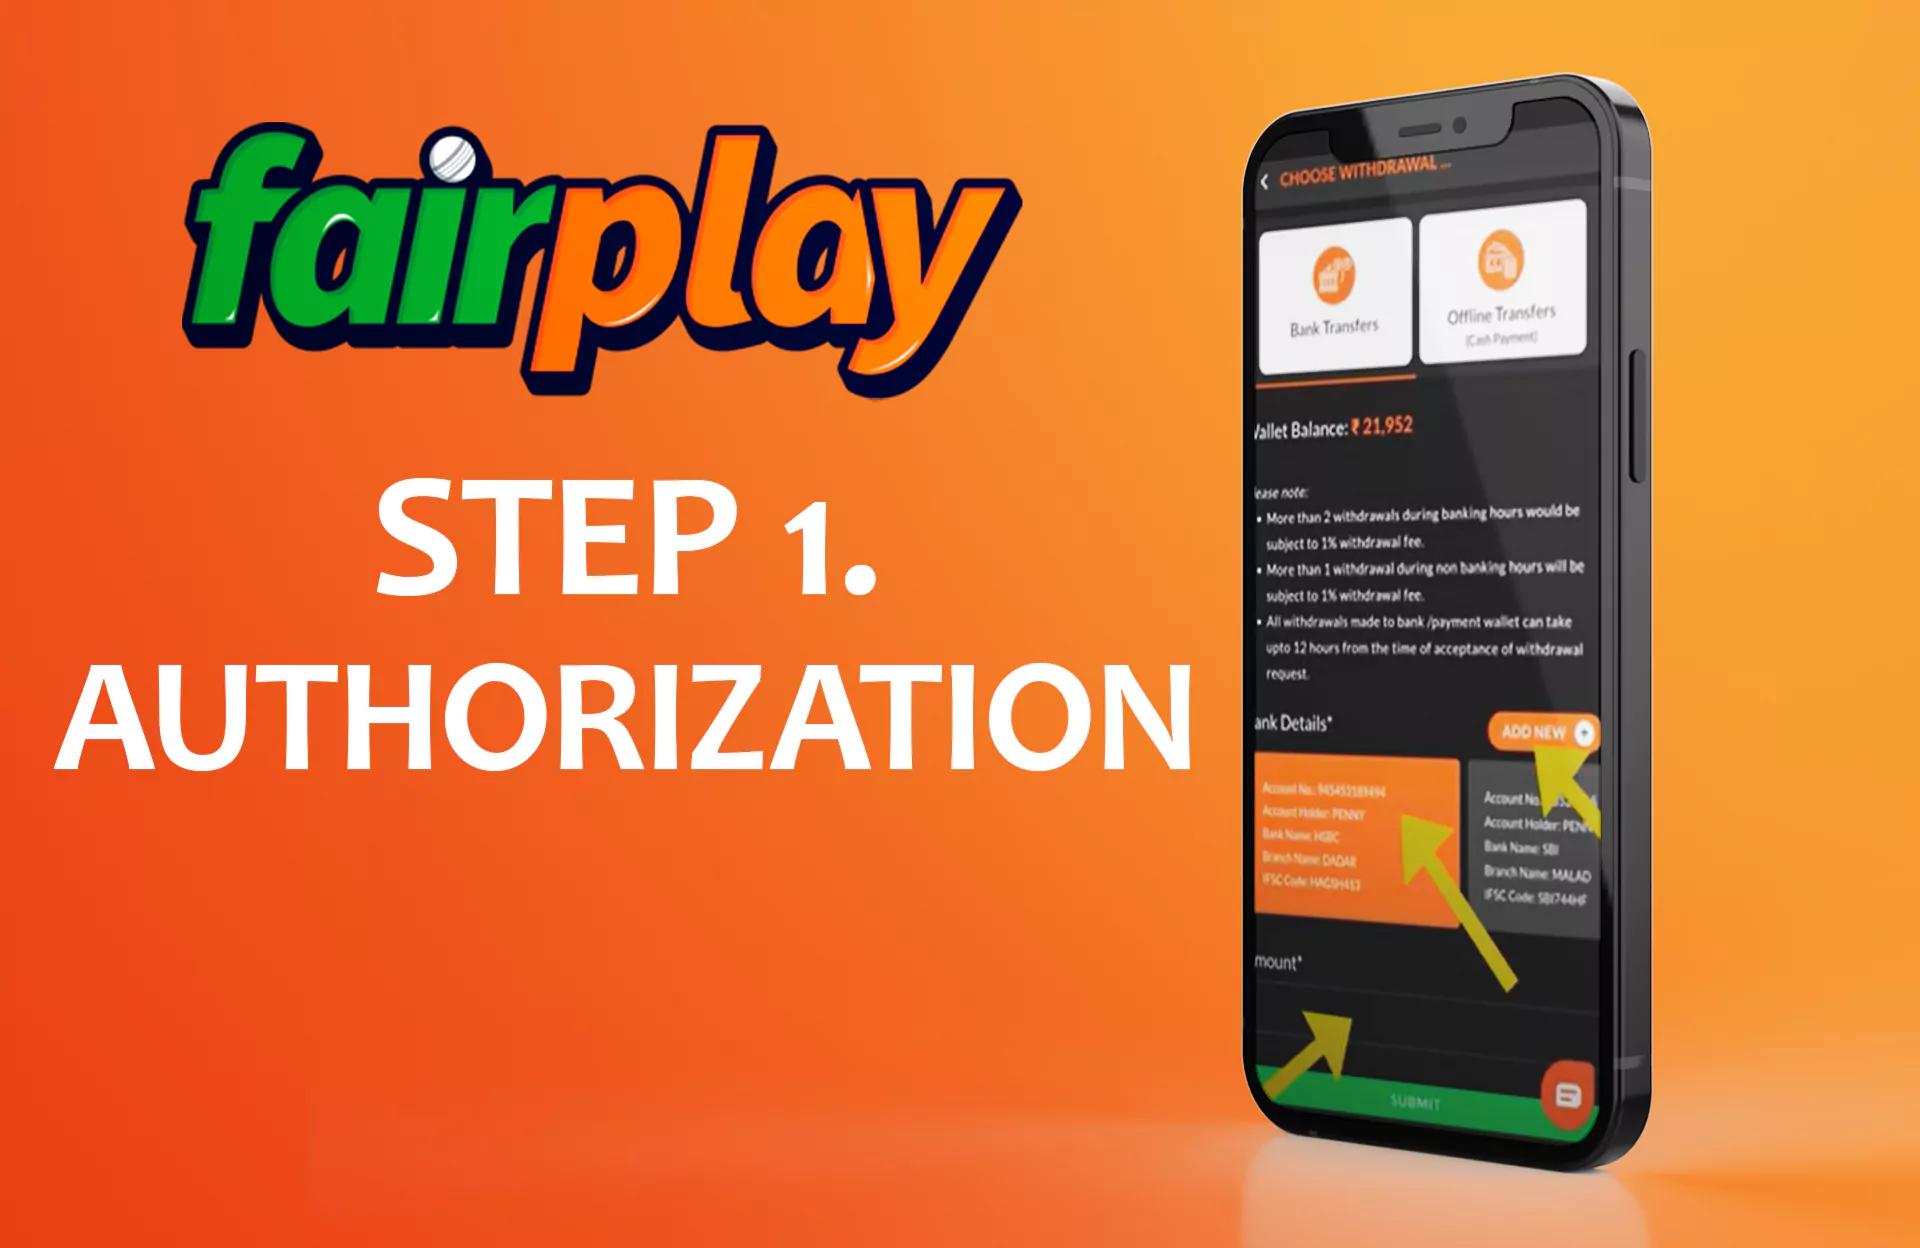 Enter your Fairplay account.